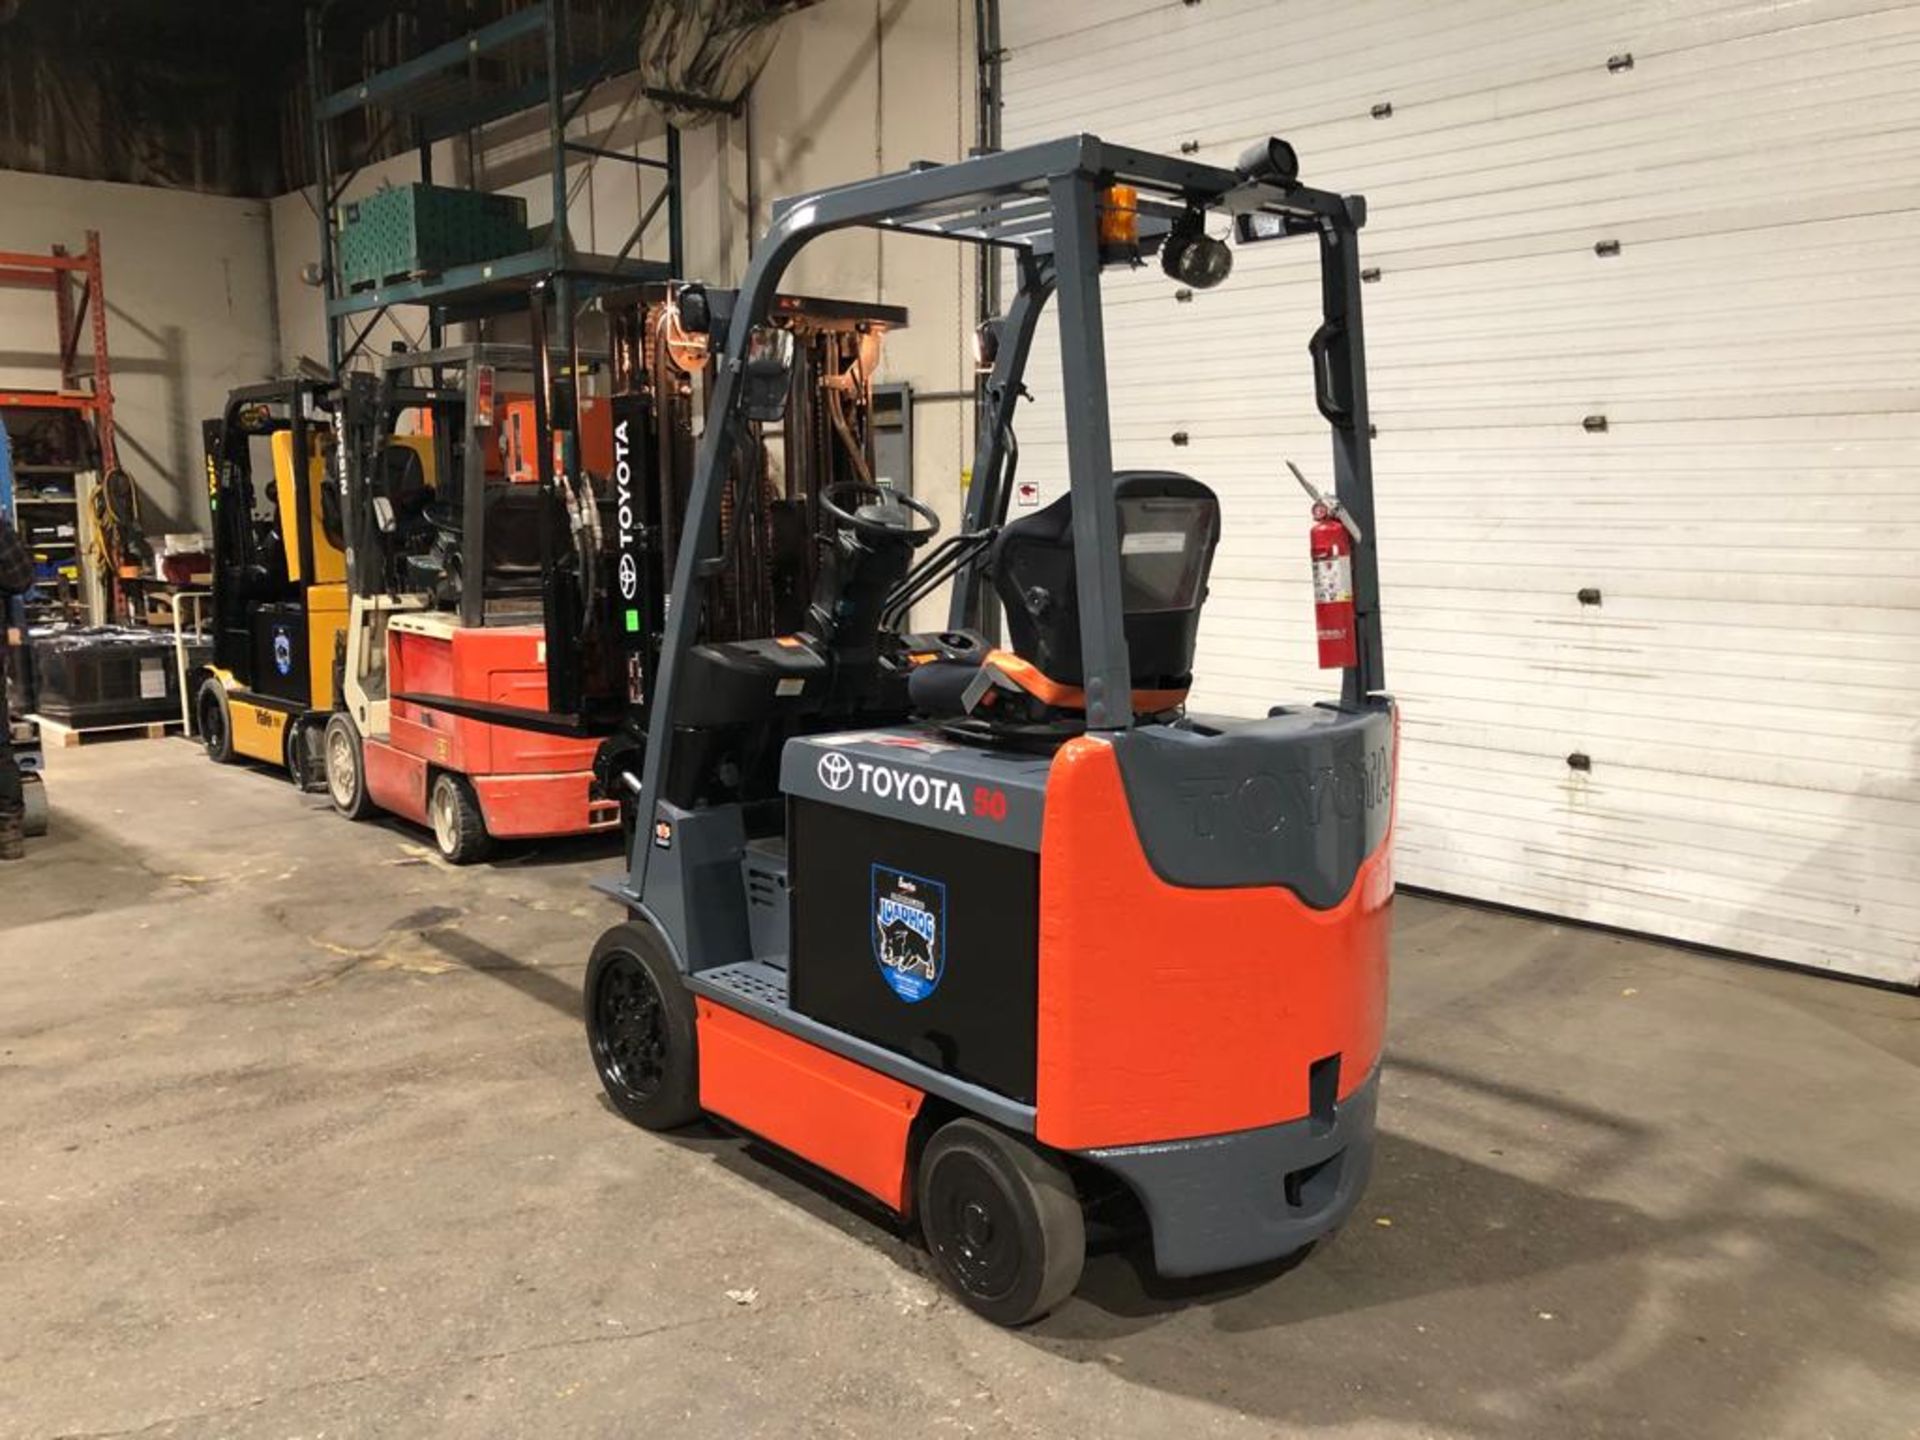 2016 Toyota 5,000lbs Capacity Forklift Electric with Sideshift and 3-stage Mast 36V - FREE CUSTOMS - Image 2 of 5